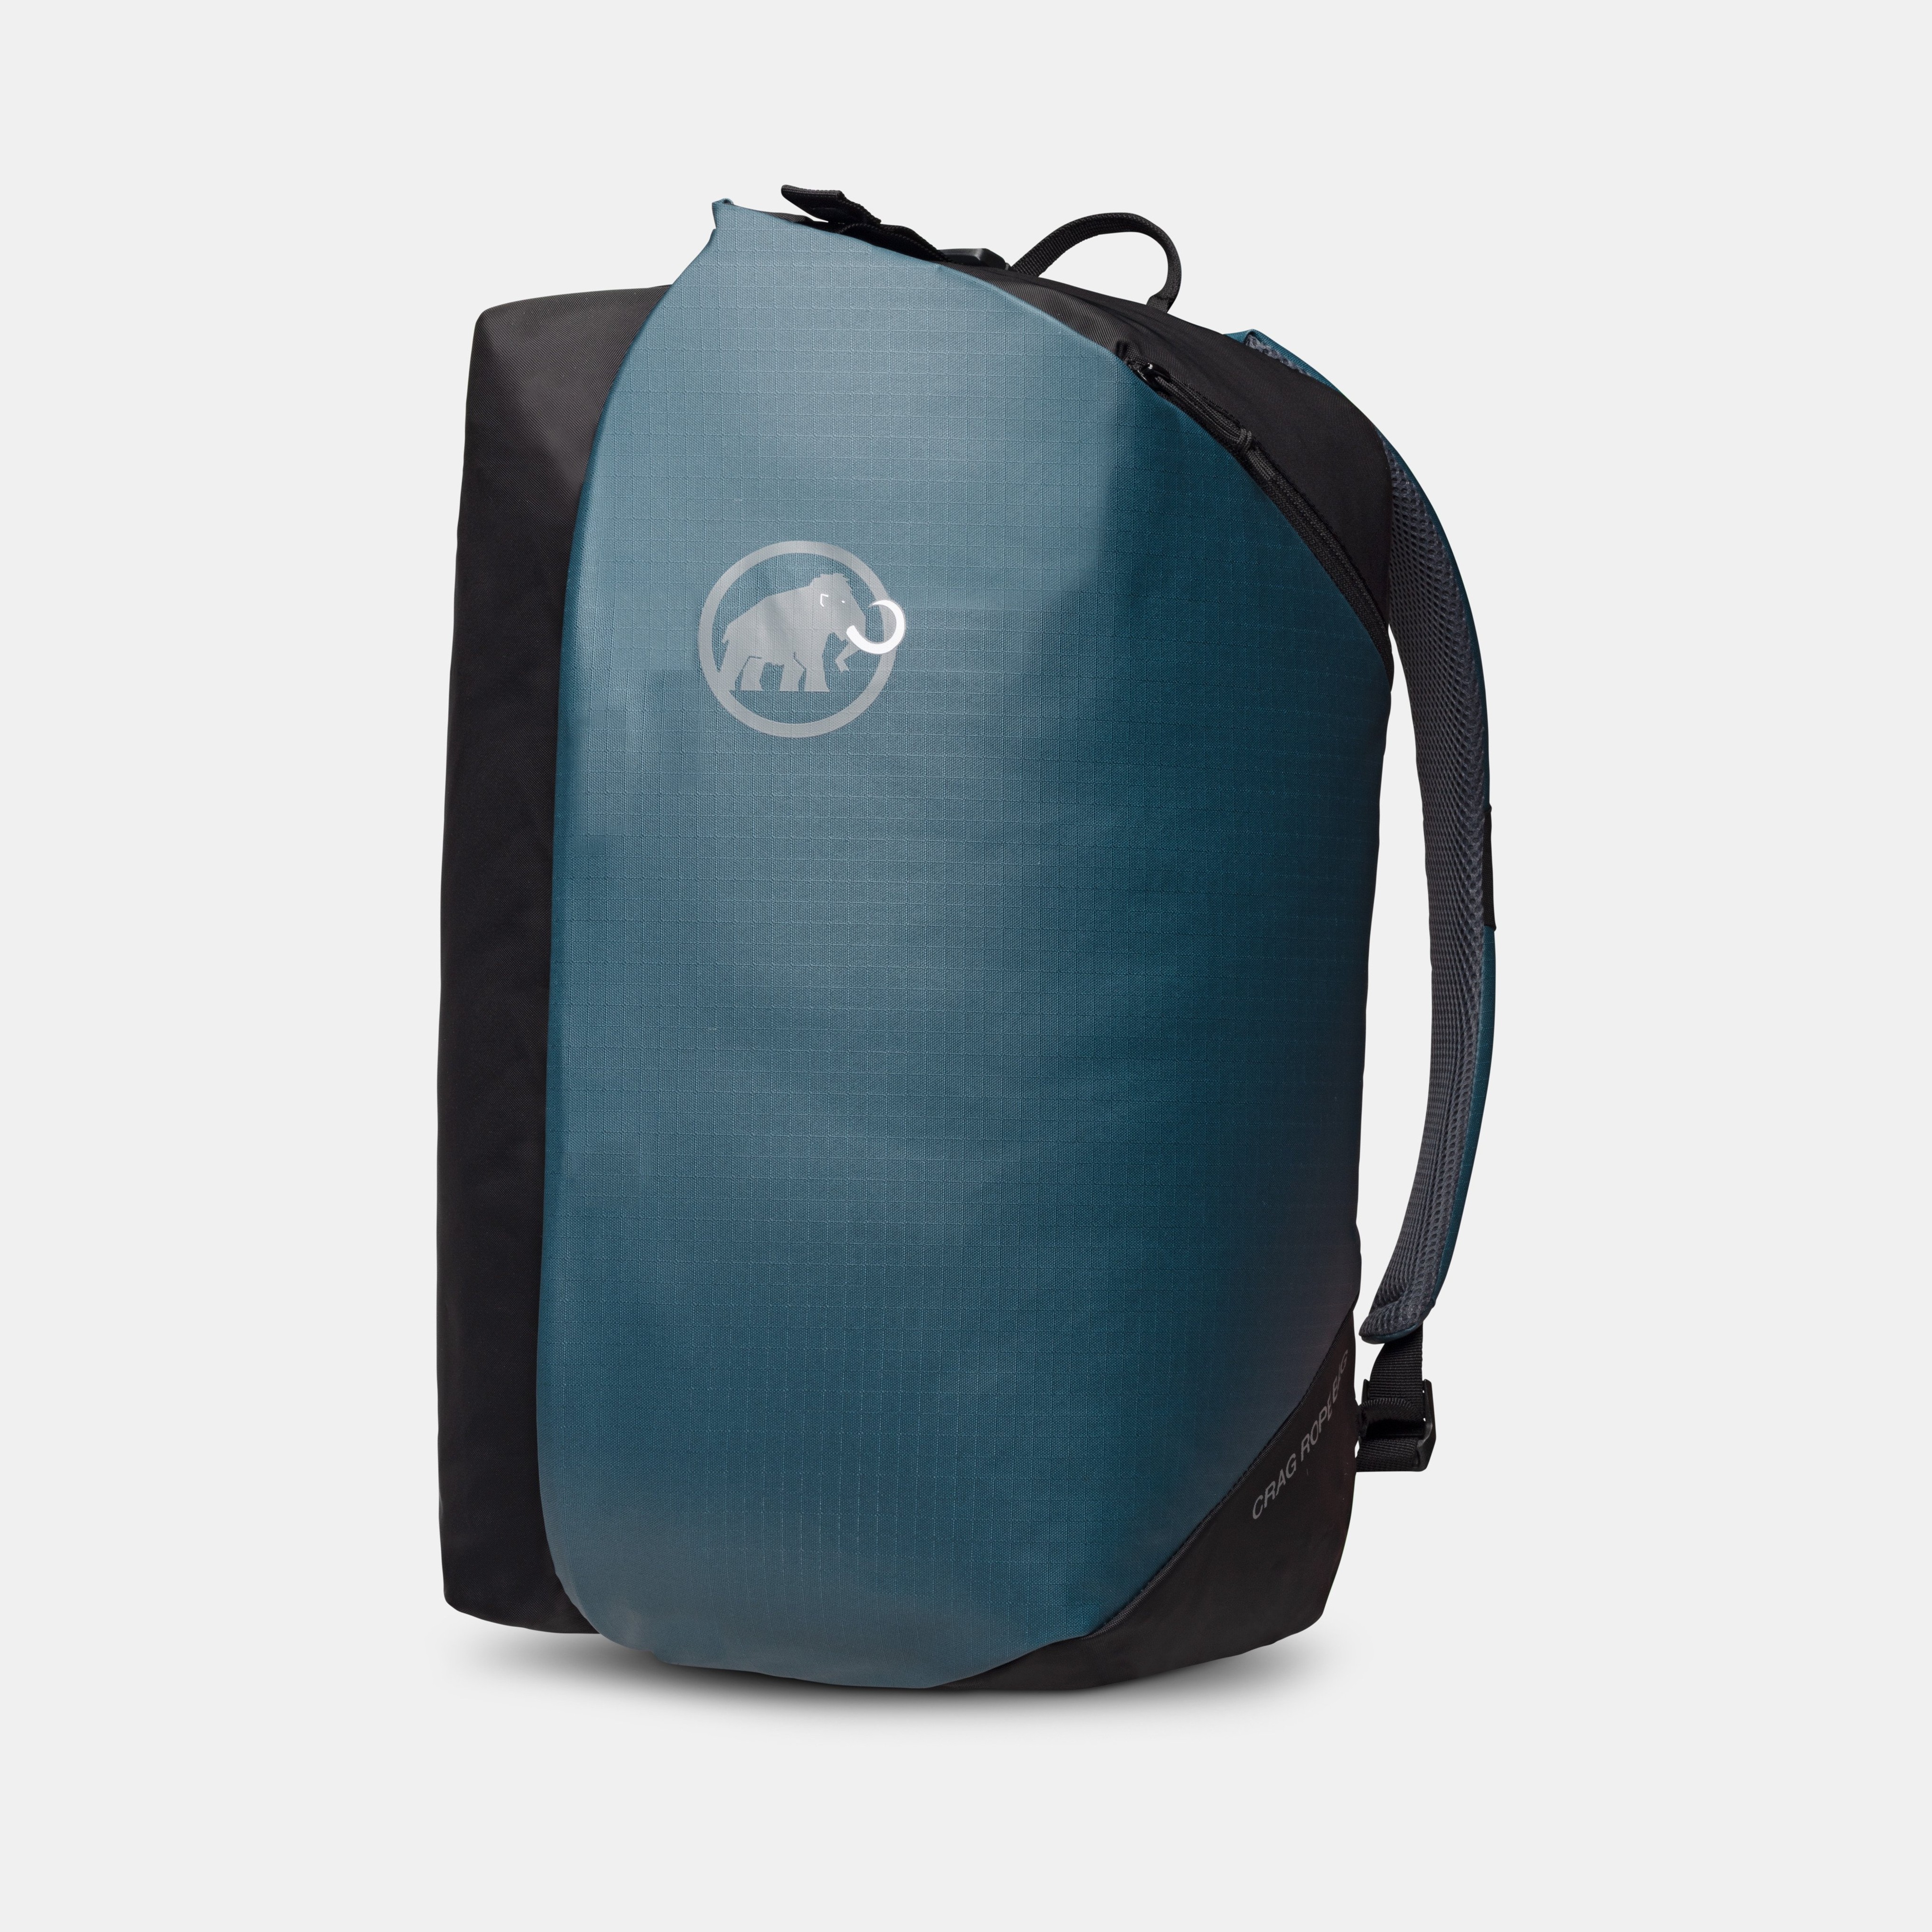 Crag Rope Bag product image